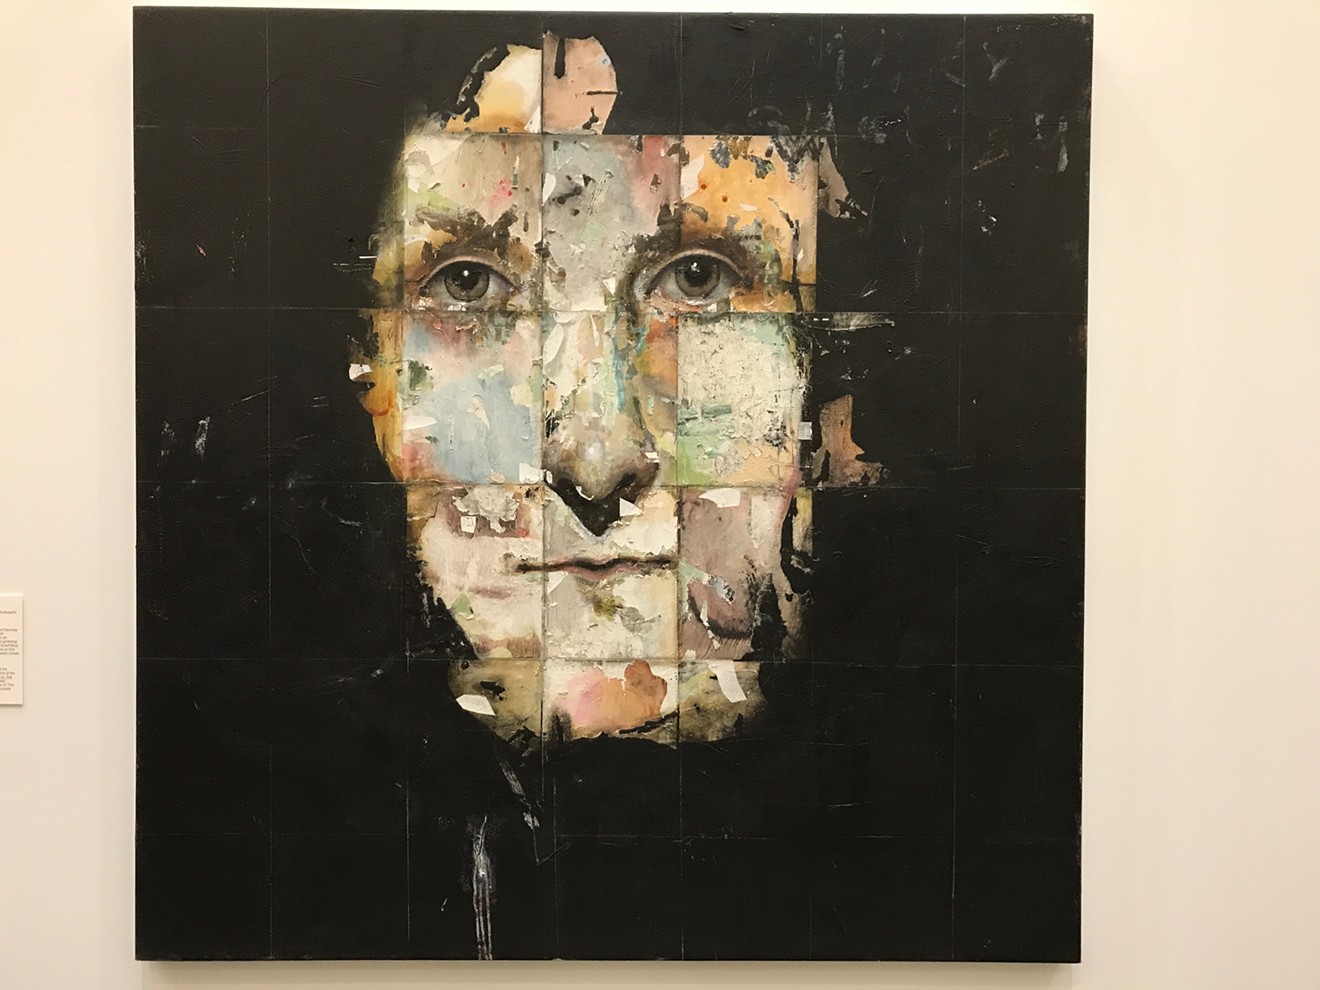 Mixed-media work by David Dauncey featured in the Frankenstein-themed exhibit at Scottsdale Civic Center Library.